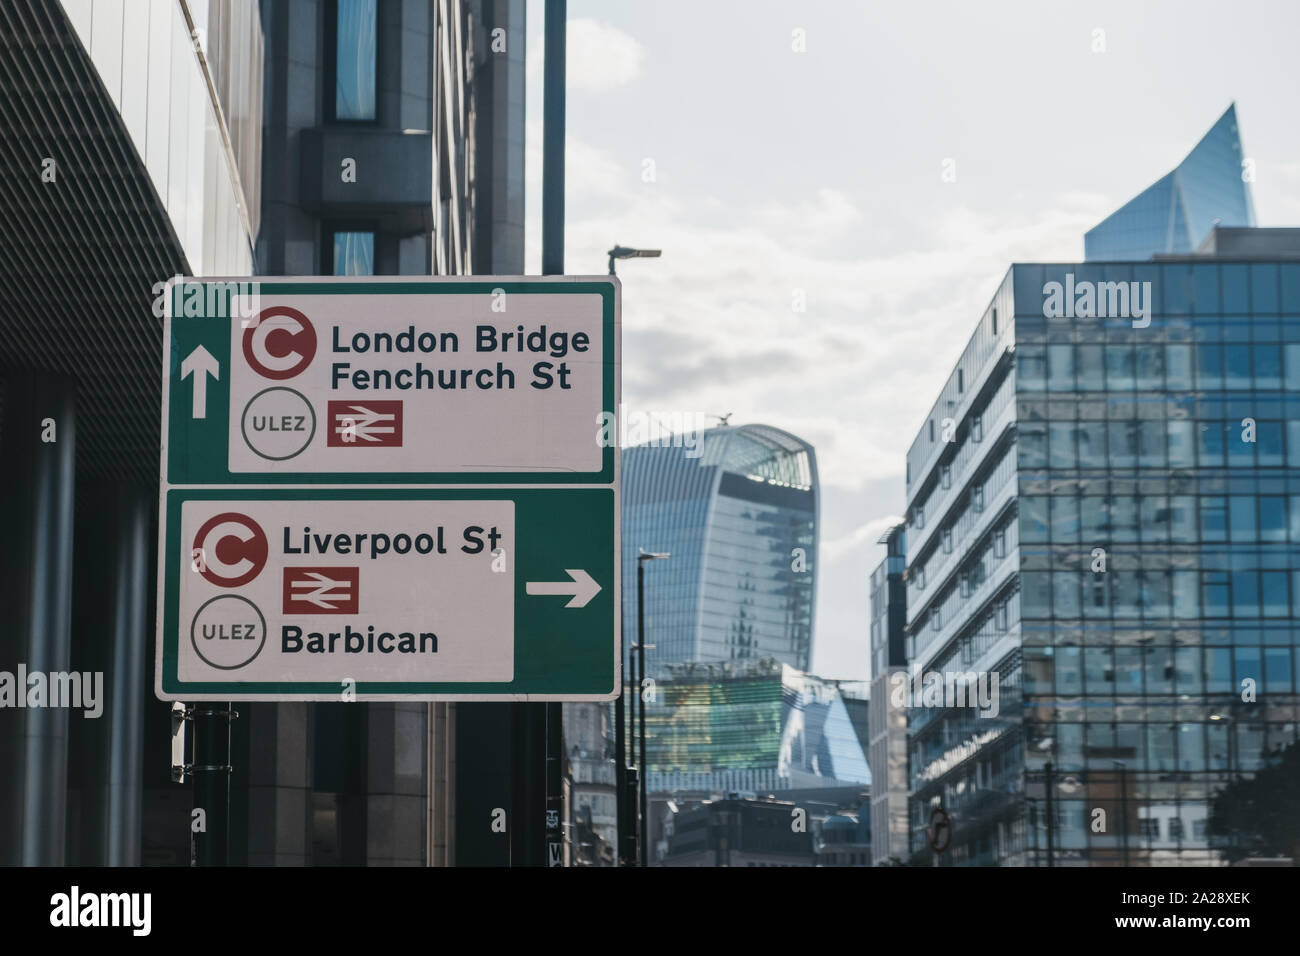 London, UK - September 7, 2019: Signs indicating the direction of Ultra Low Emission Zone (ULEZ) on a street in London. ULEZ was introduced in 2019 to Stock Photo